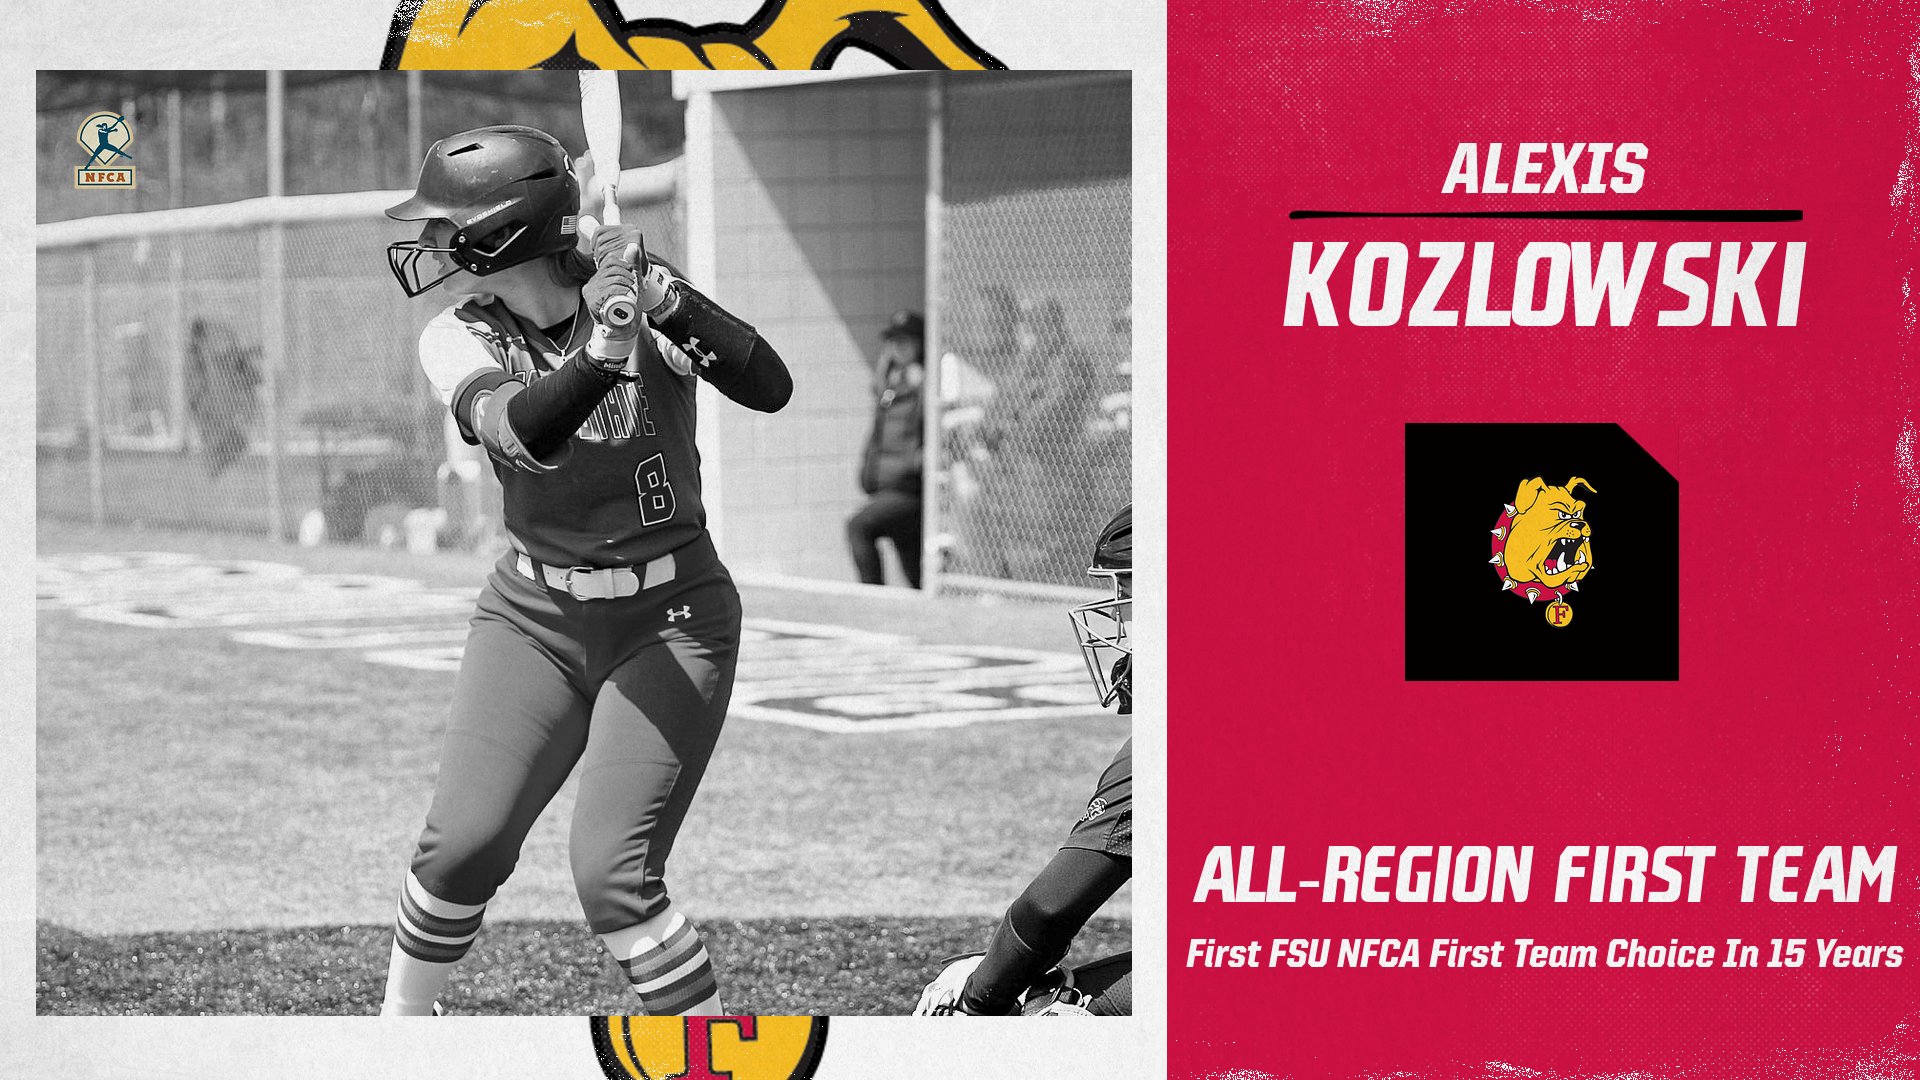 Alexis Kozlowski Becomes Ferris State's First NFCA All-Region First Team Choice In 15 Years